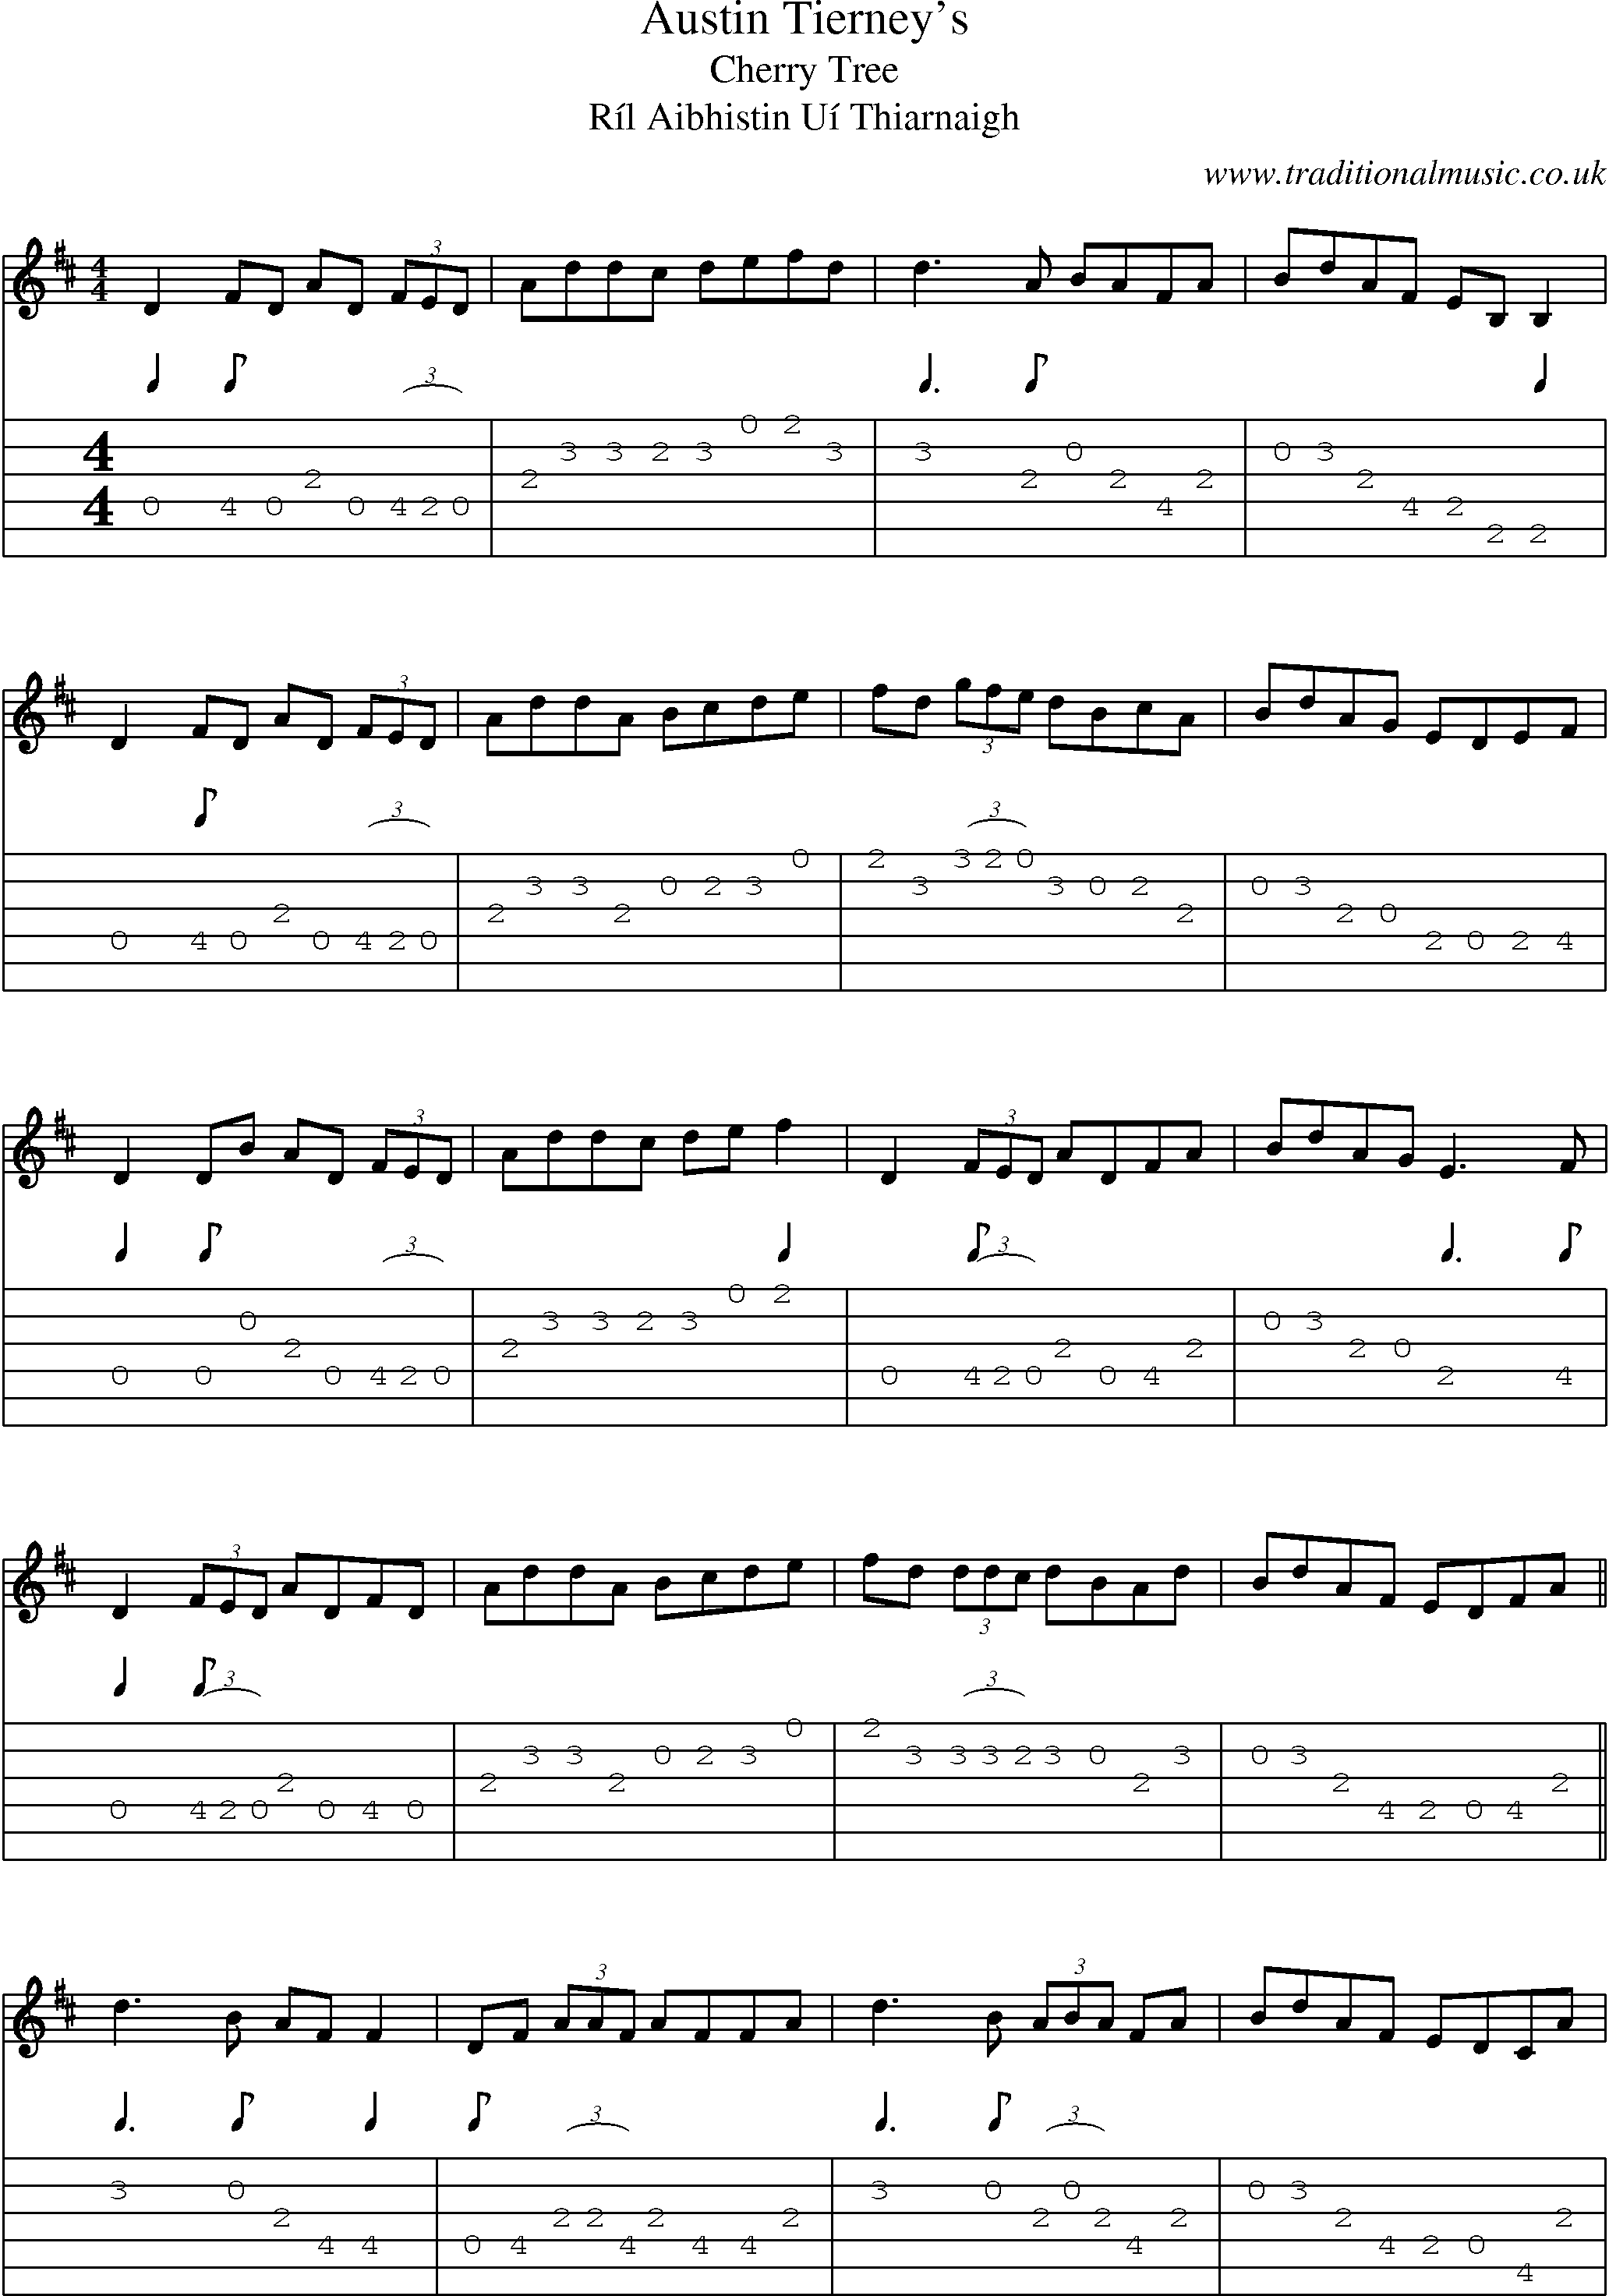 Music Score and Guitar Tabs for Austin Tierneys